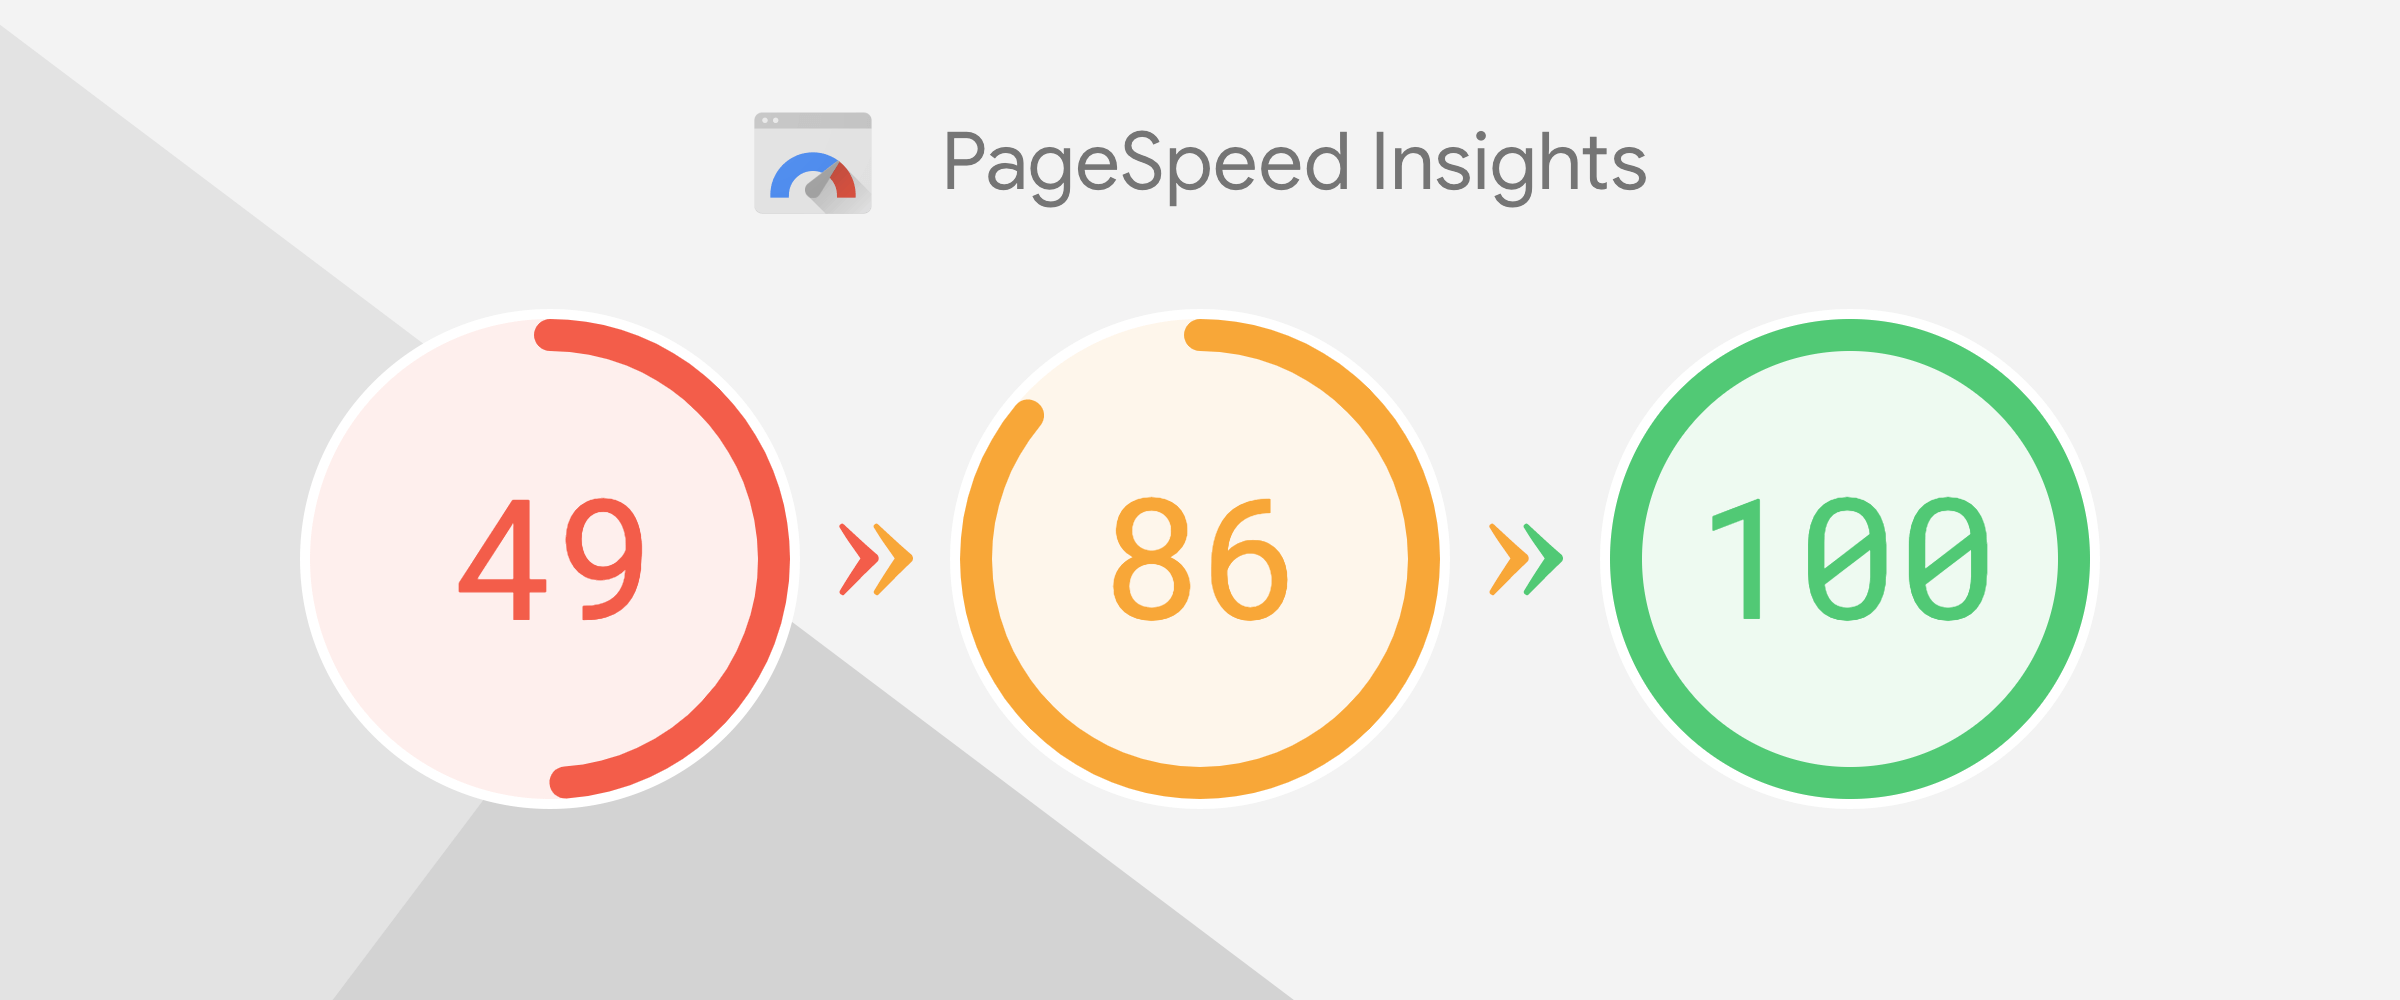 Chasing the perfect 100 pagespeed